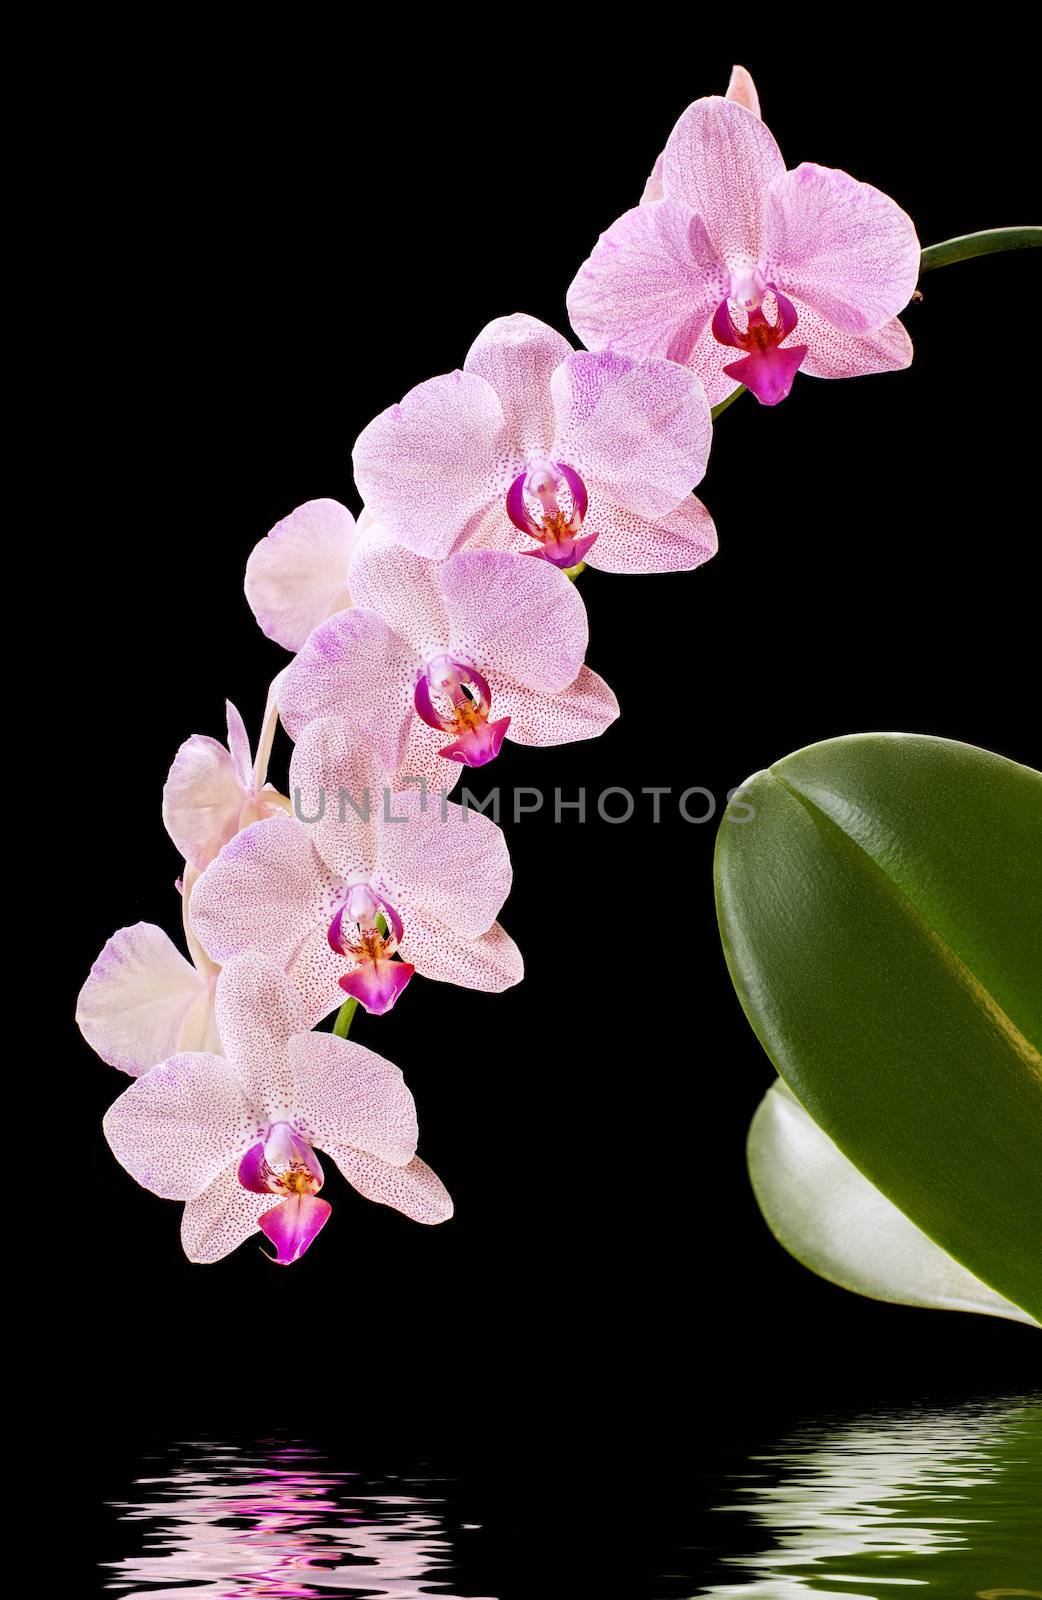 Phalaenopsis. Orchid on black background and water reflection